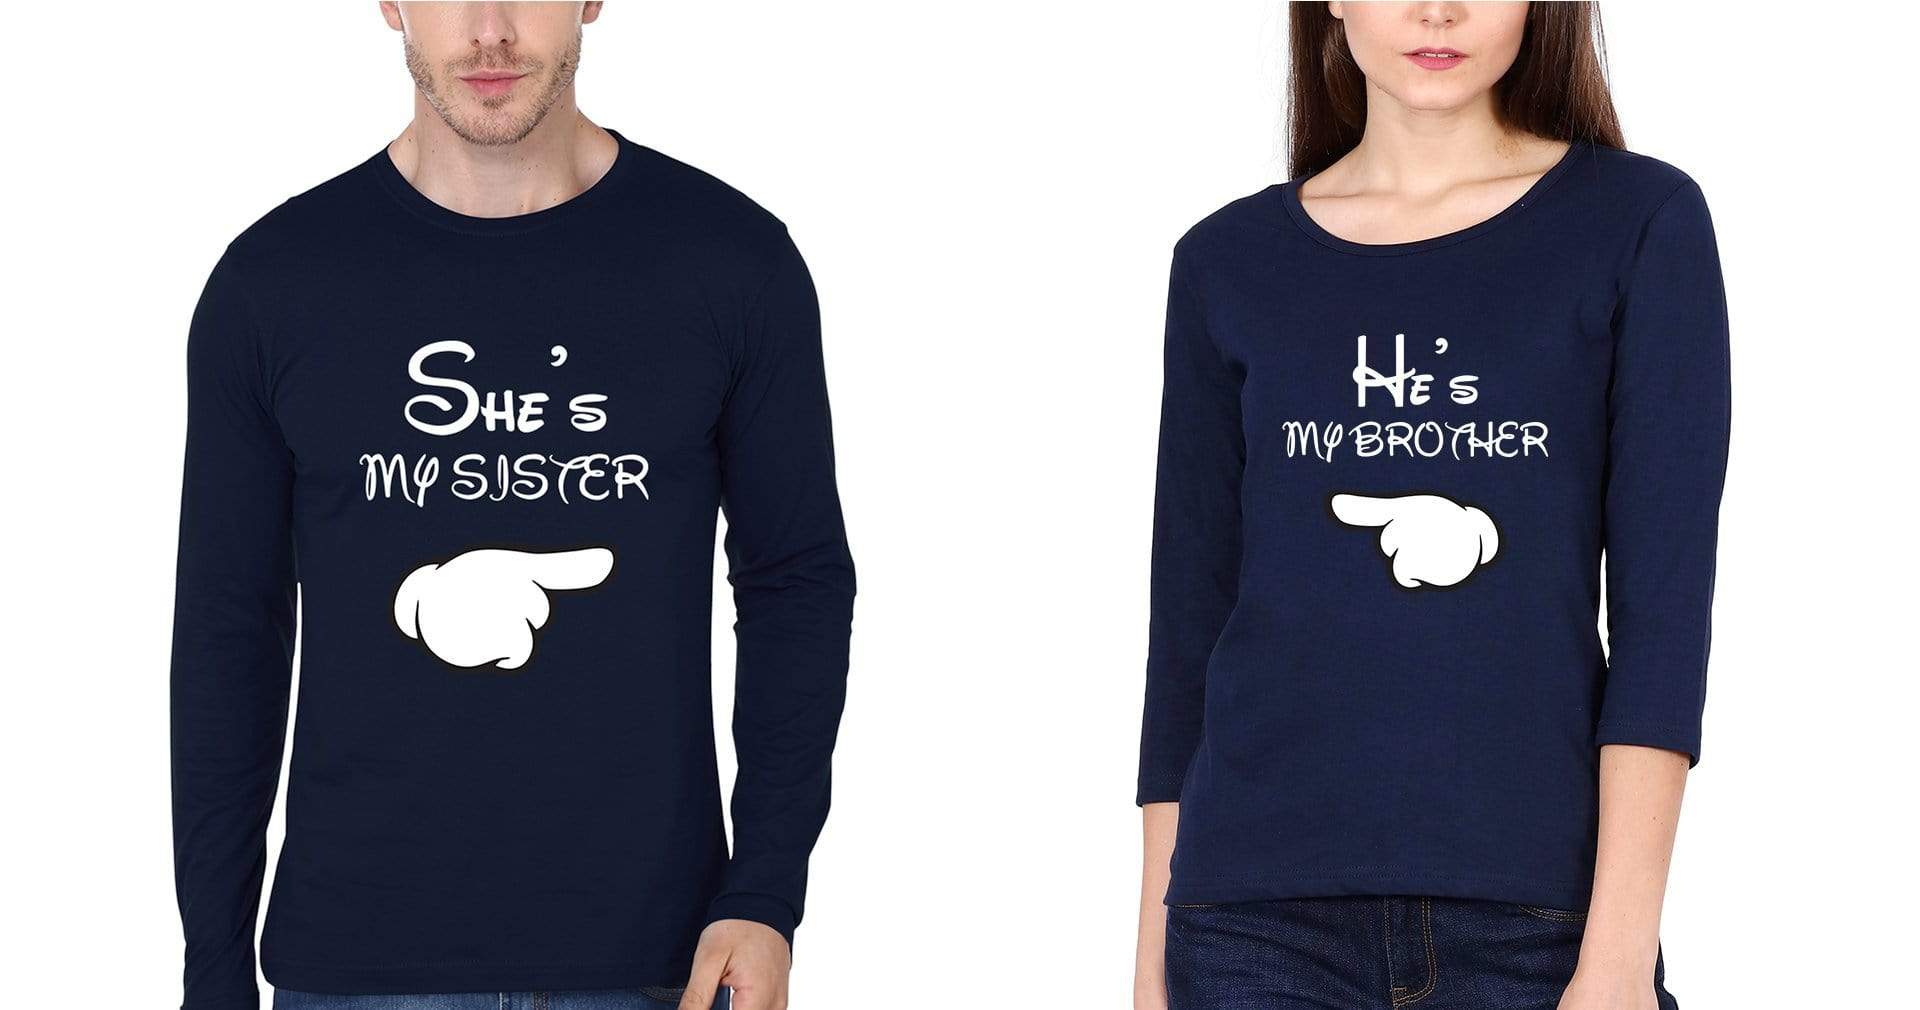 FunkyTradion Hes My Brother Brother Sister Navy Blue Full Sleeve T Shirt - FunkyTradition